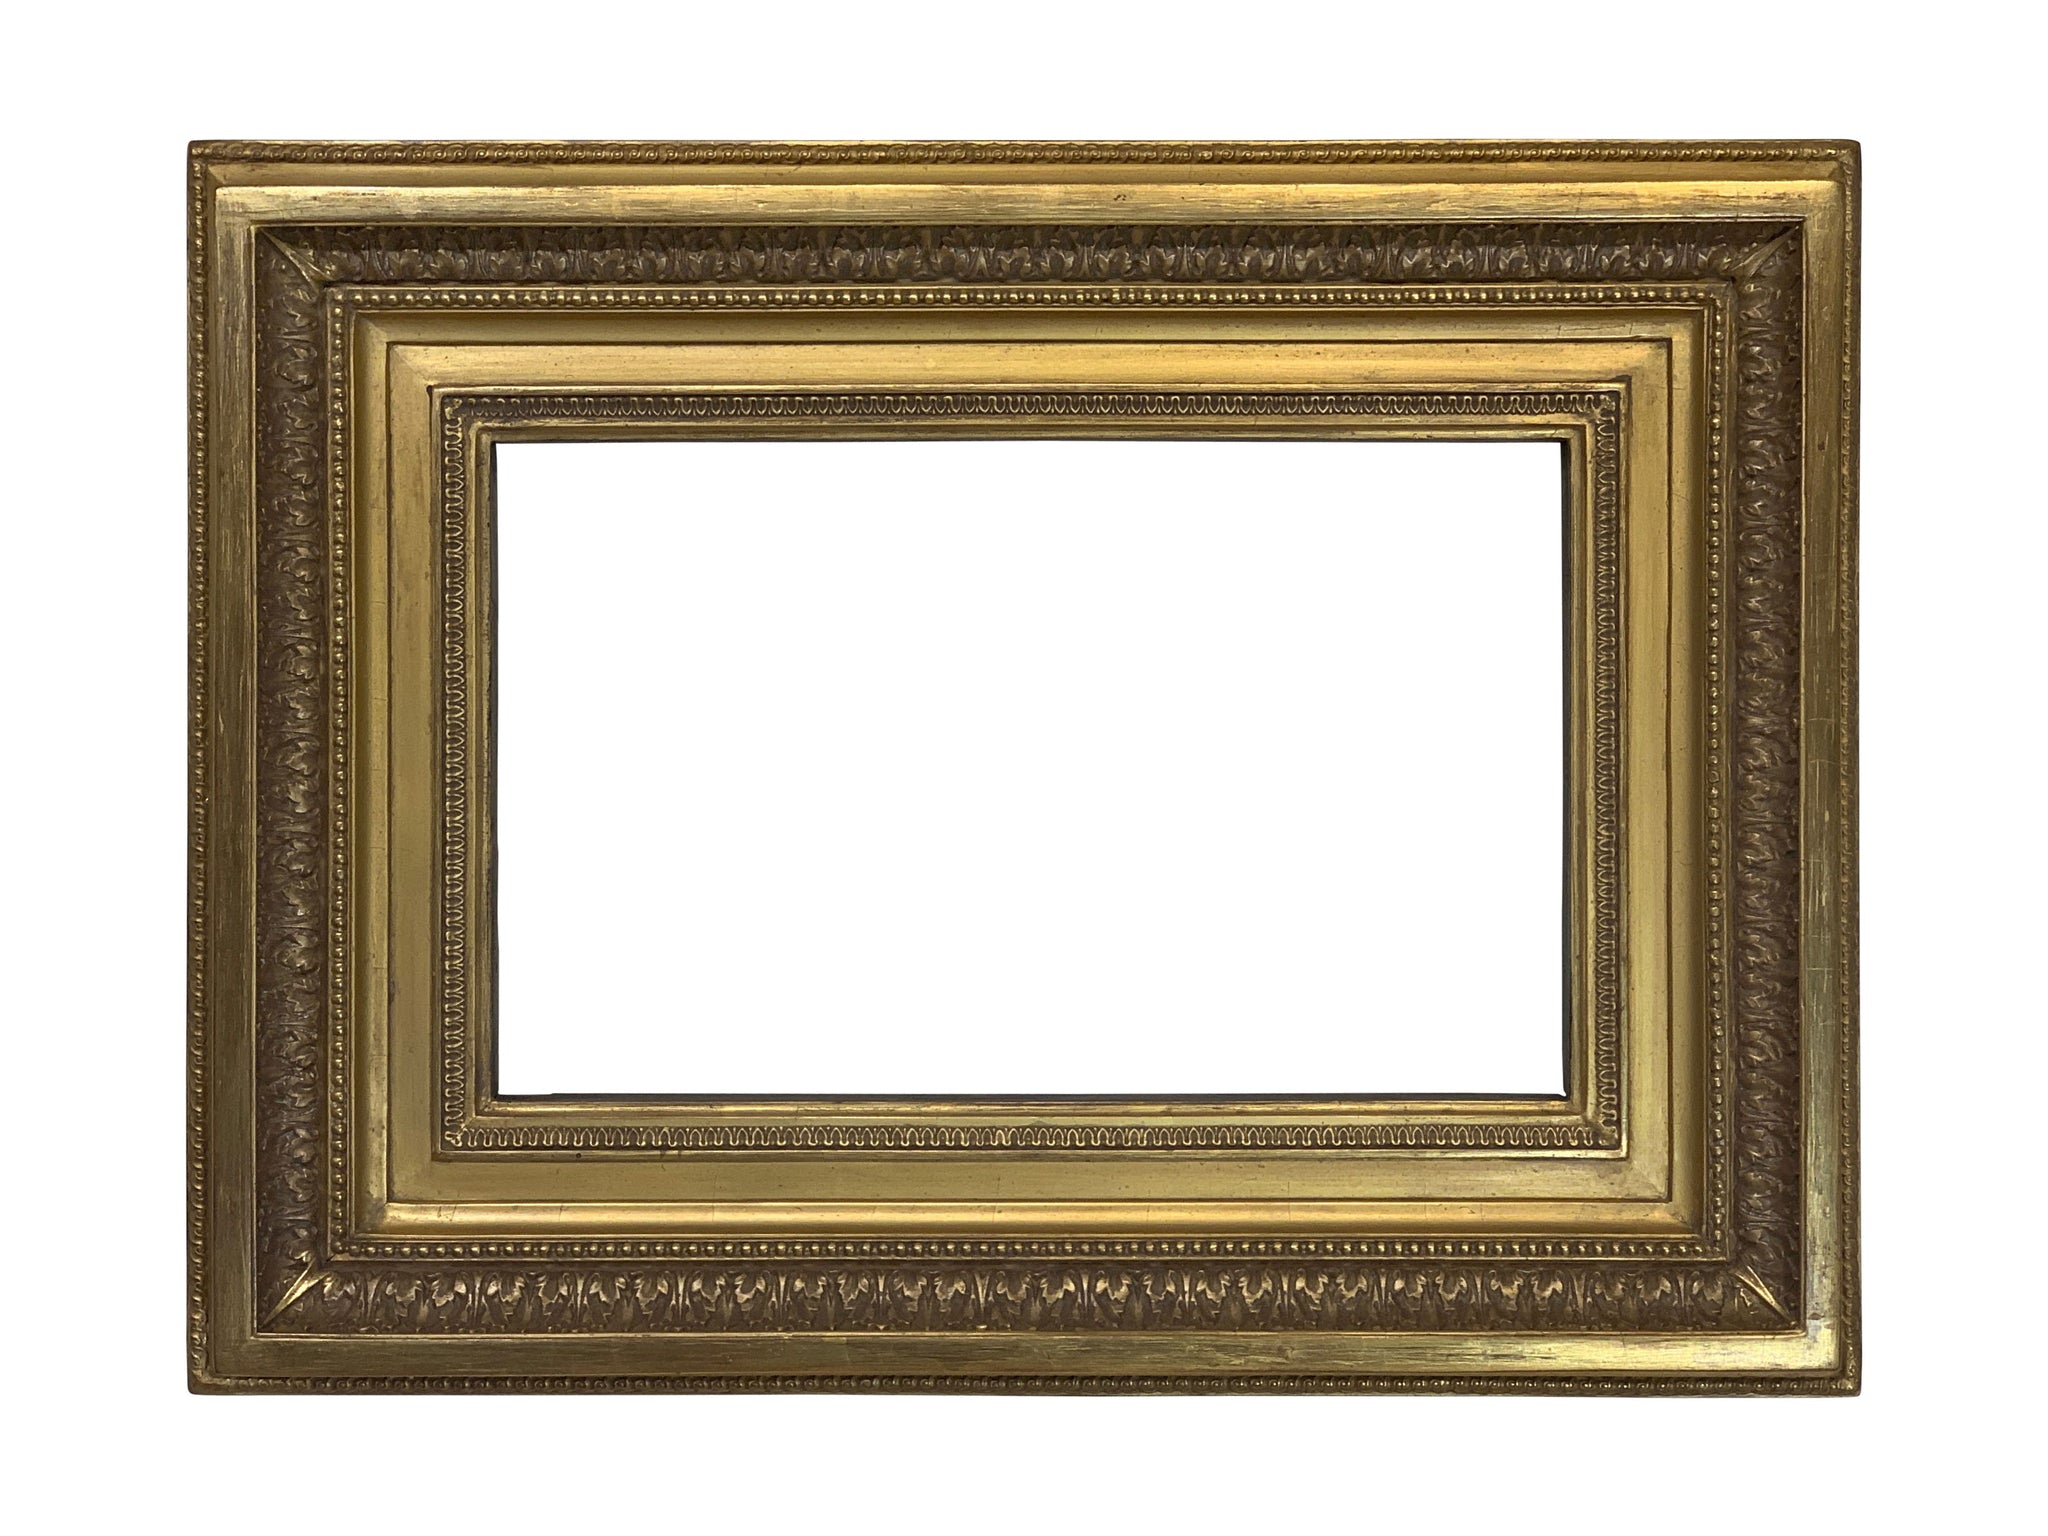 American 9x15 inch Antique Gold Picture Frame for canvas art circa 1800s (19th century).